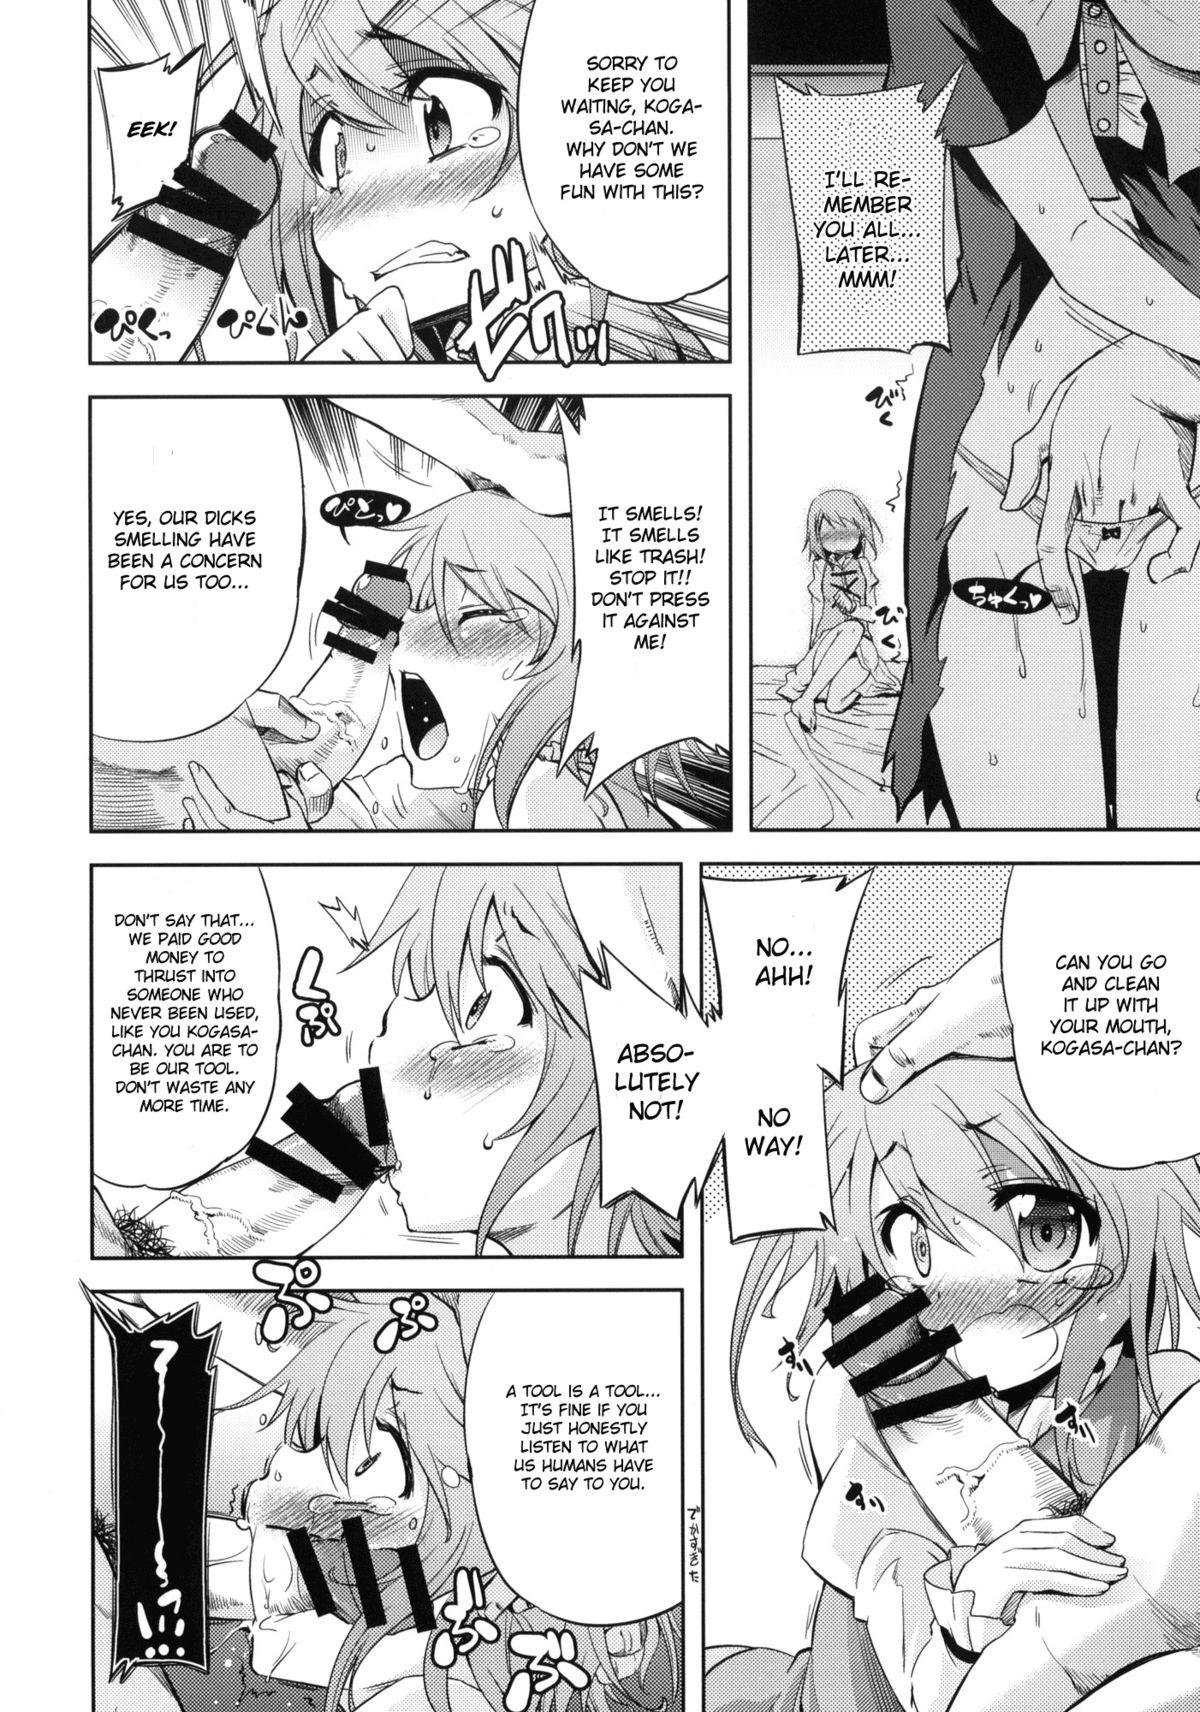 Masterbate With Your Smile - Touhou project Juggs - Page 9